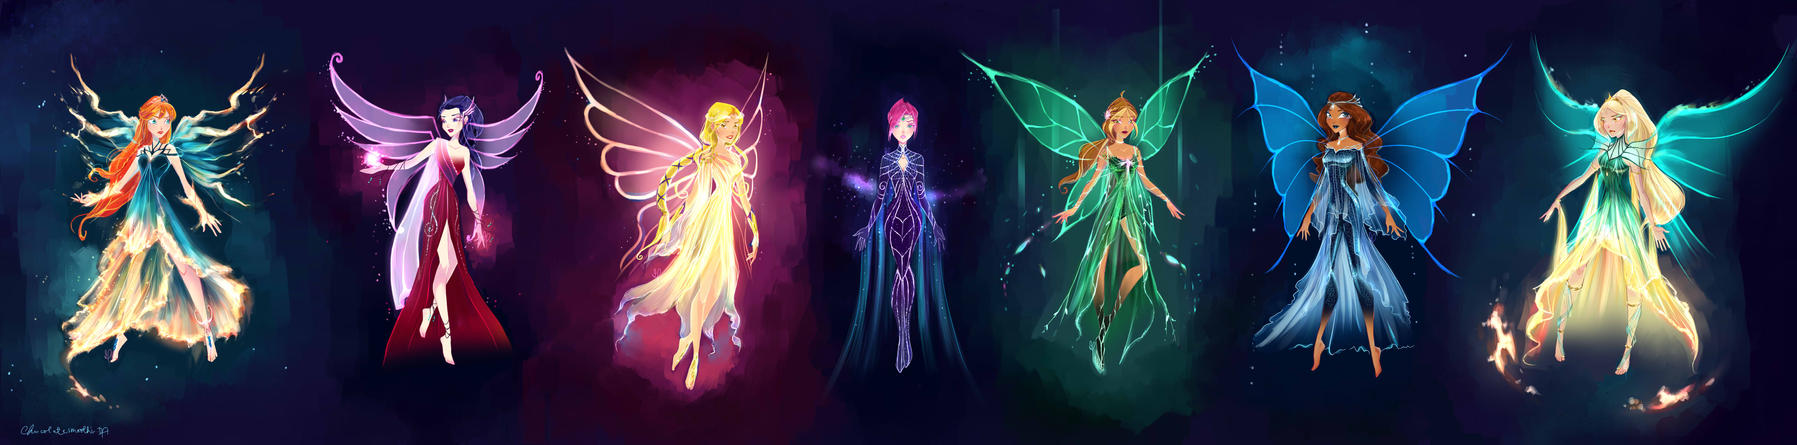 almost_magical__ultimate_winx_by_chocolatesmoothie-dan8a82